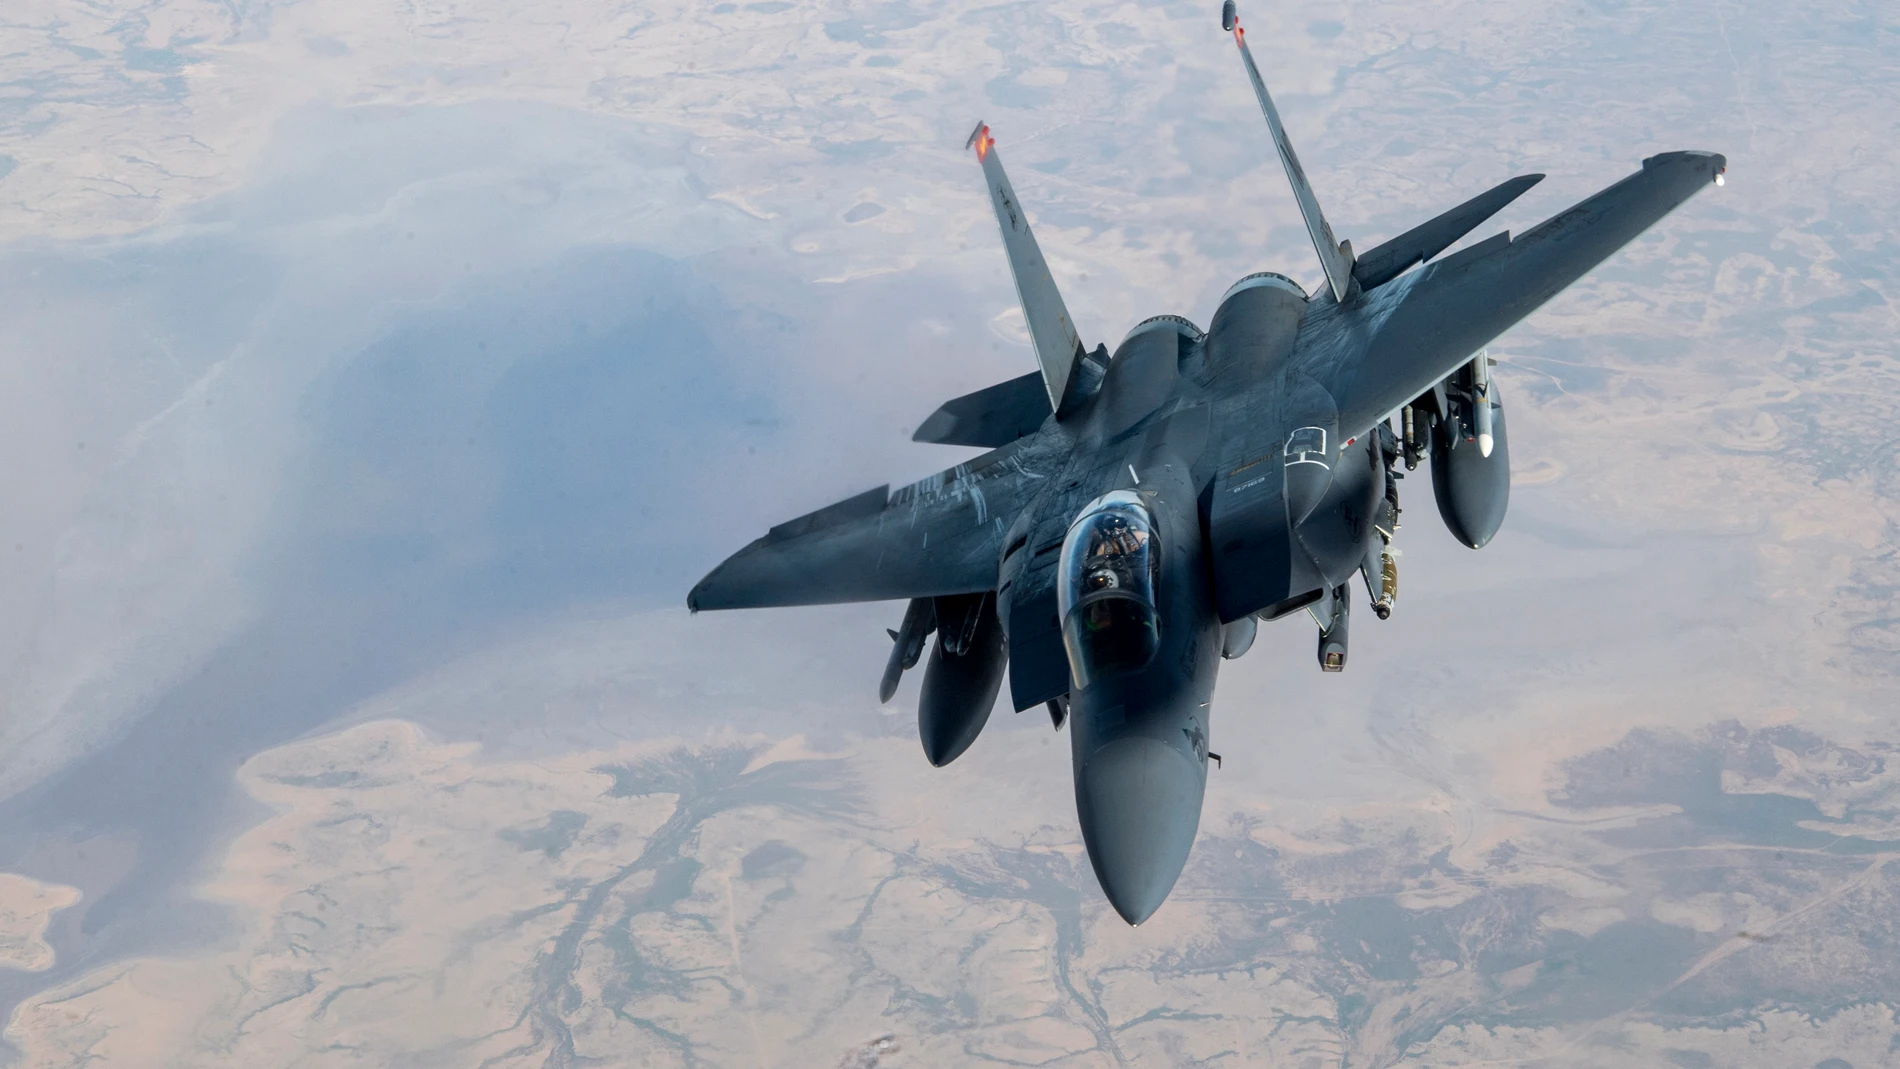 March 11, 2020, Al Udeid Air Base, Qatar: A U.S. Air Force F-15E Strike Eagle fighter aircraft, assigned to the 494th Expeditionary Fighter Squadron out of Al Udeid Air Base, Qatar, during a sortie in support of Operation Inherent Resolve March 11, 2020 over Iraq. (Foto de ARCHIVO) 11/03/2020